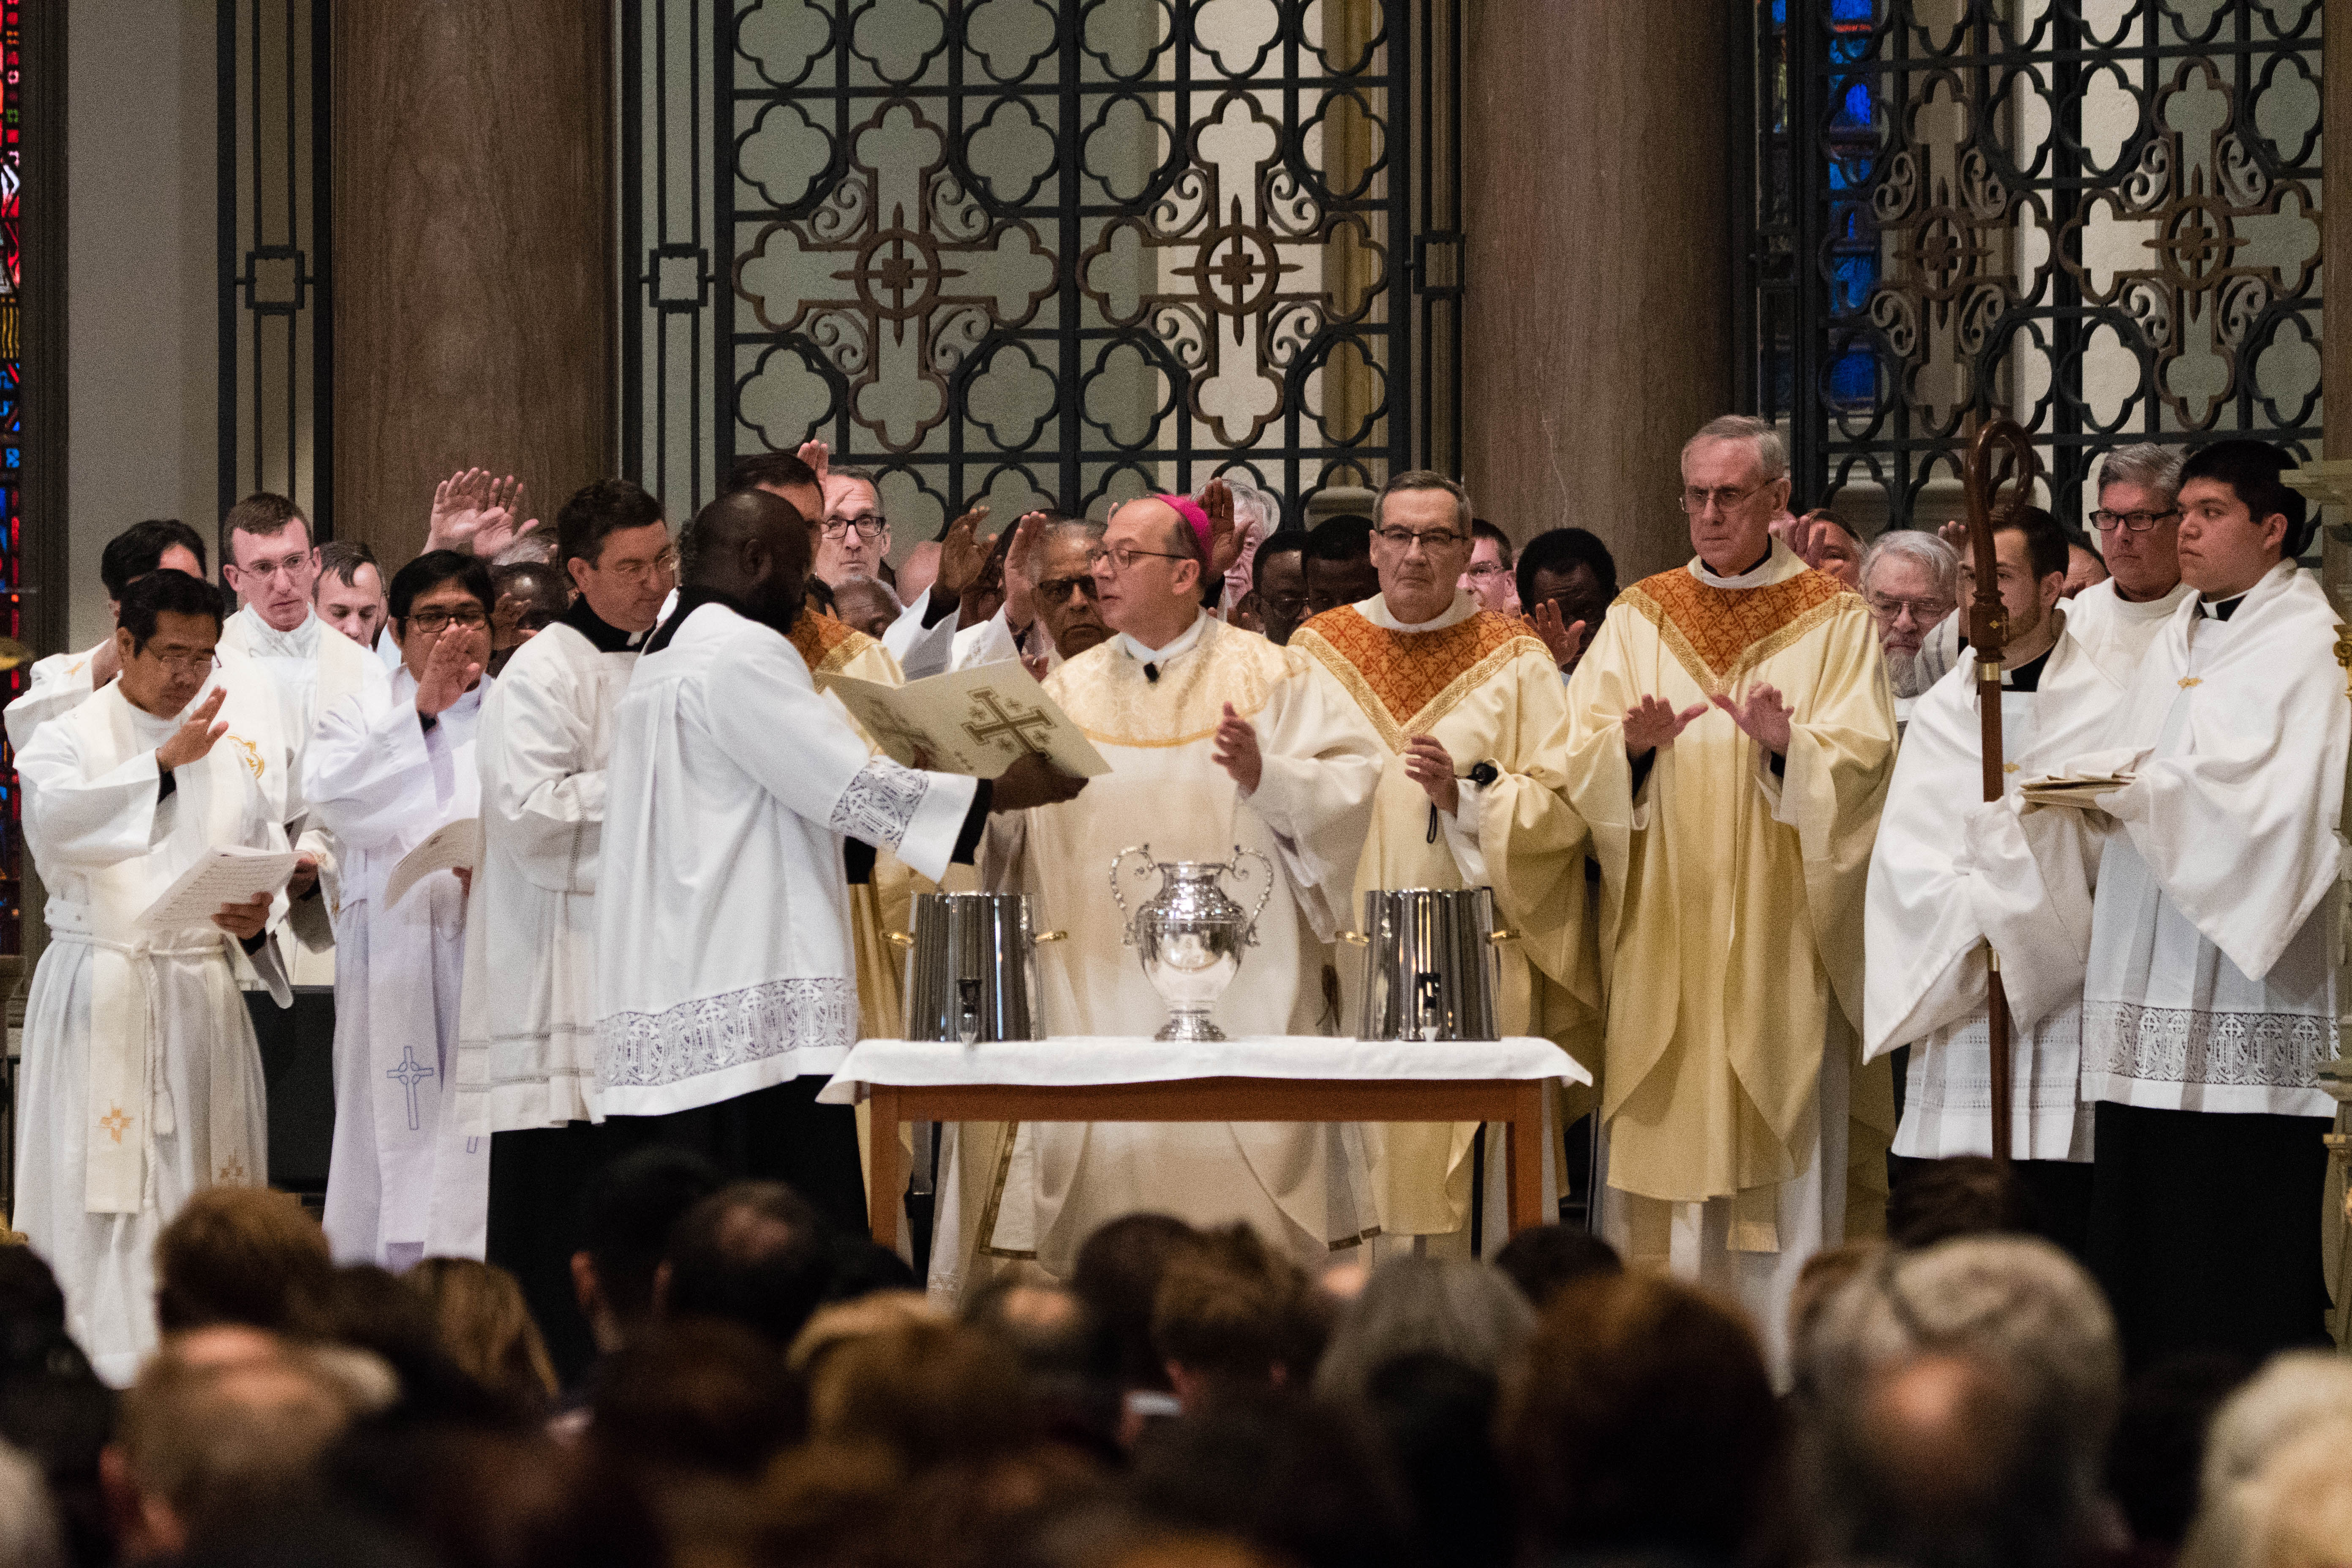 Chrism Mass will be Celebrated on Monday, April 15